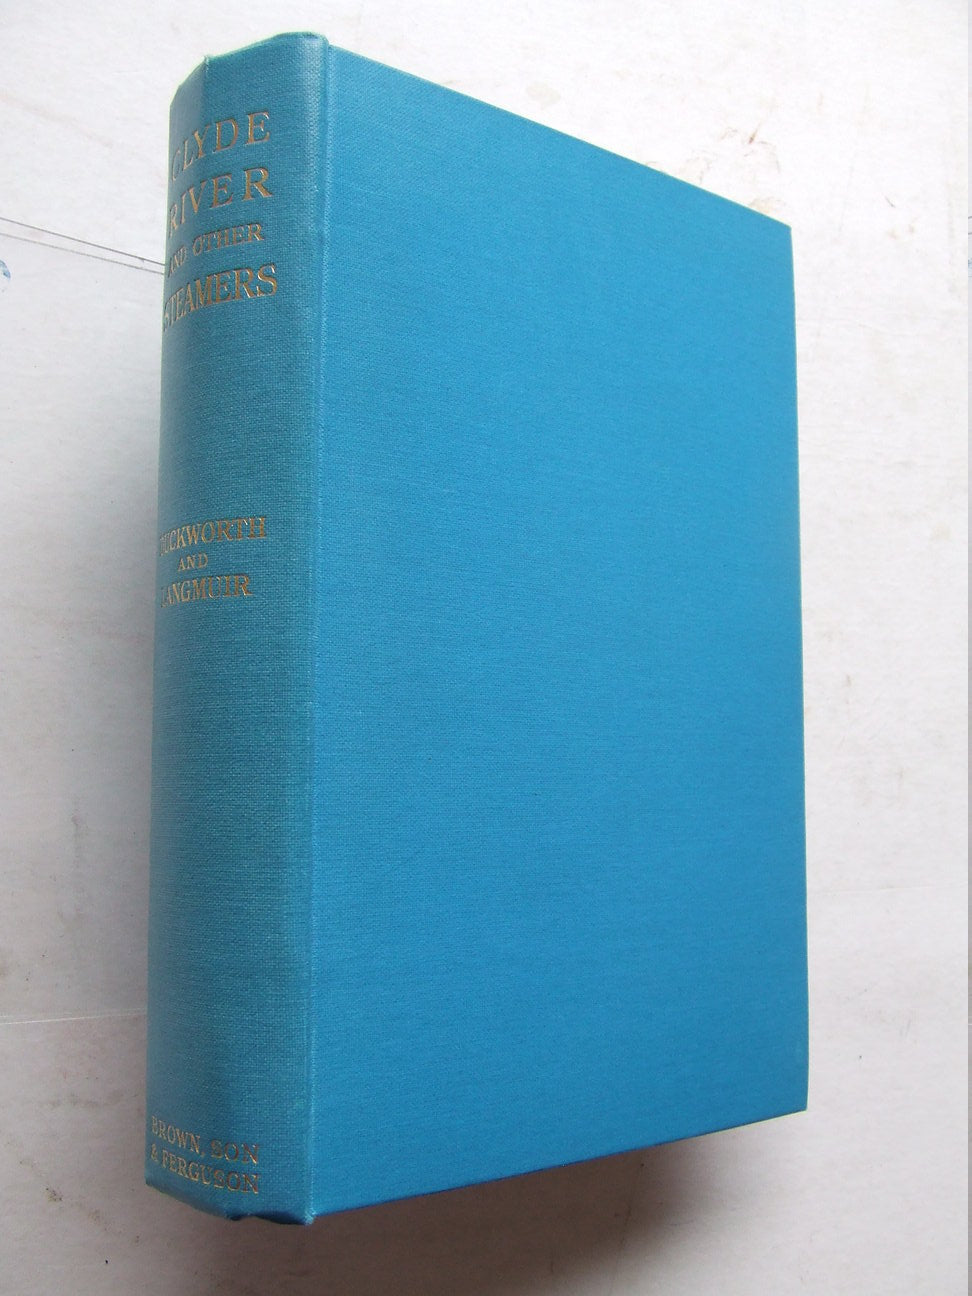 Clyde River and Other Steamers.  1st edition